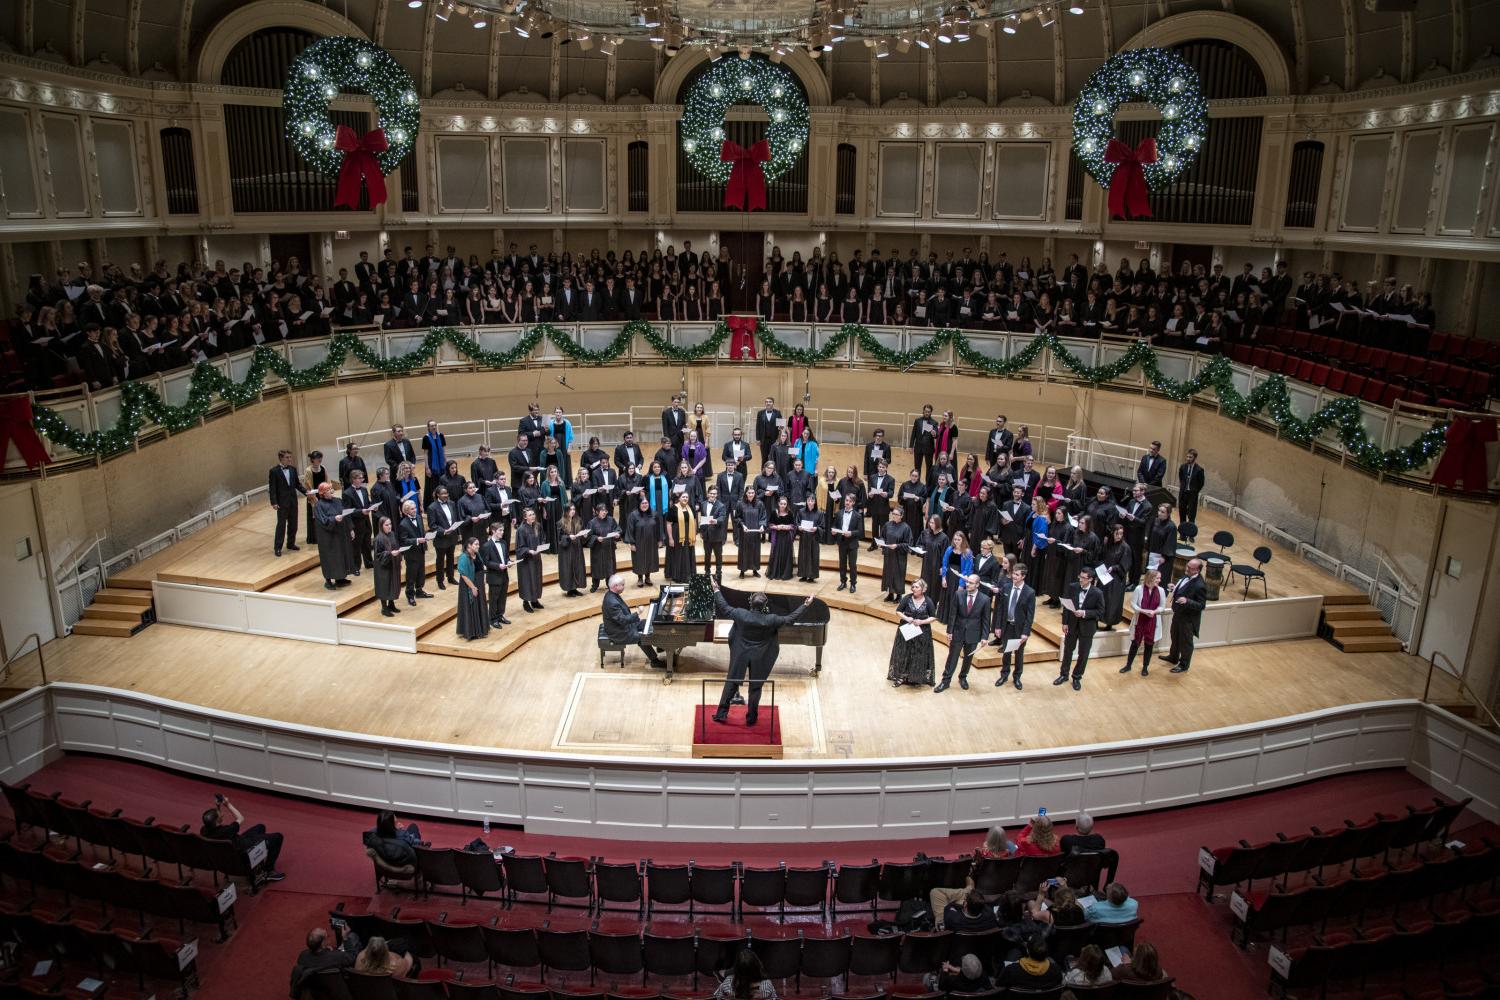 The <a href='http://ydo.hwanfei.com'>bv伟德ios下载</a> Choir performs in the Chicago Symphony Hall.